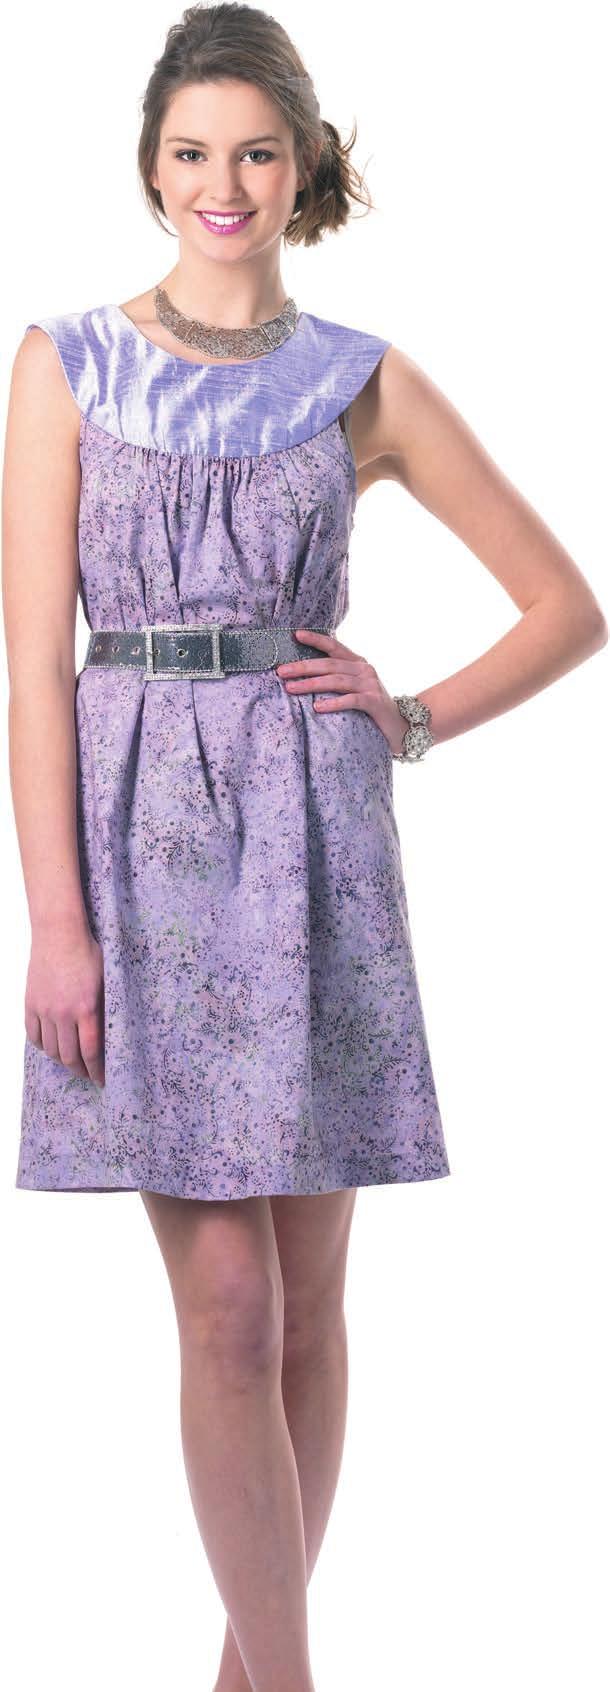 patternfreepatternfreepatternfreepatternfreepatternfreepatternfreepattern sewfashion This pretty dress uses under two metres of fabric so can be inexpensive to make.